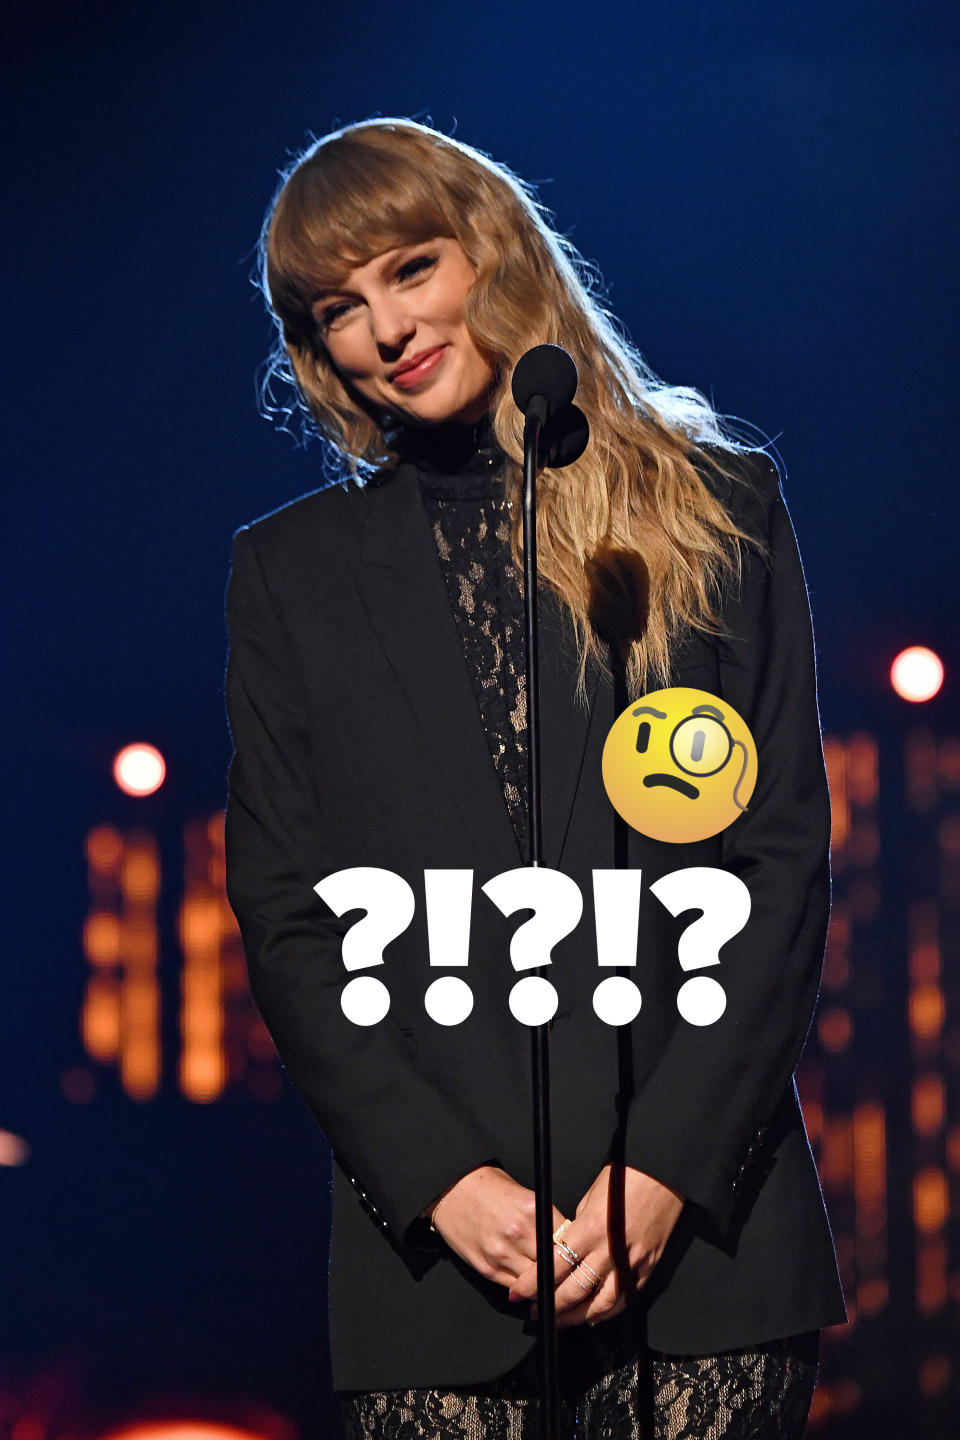 Taylor Swift with "?!?!?"